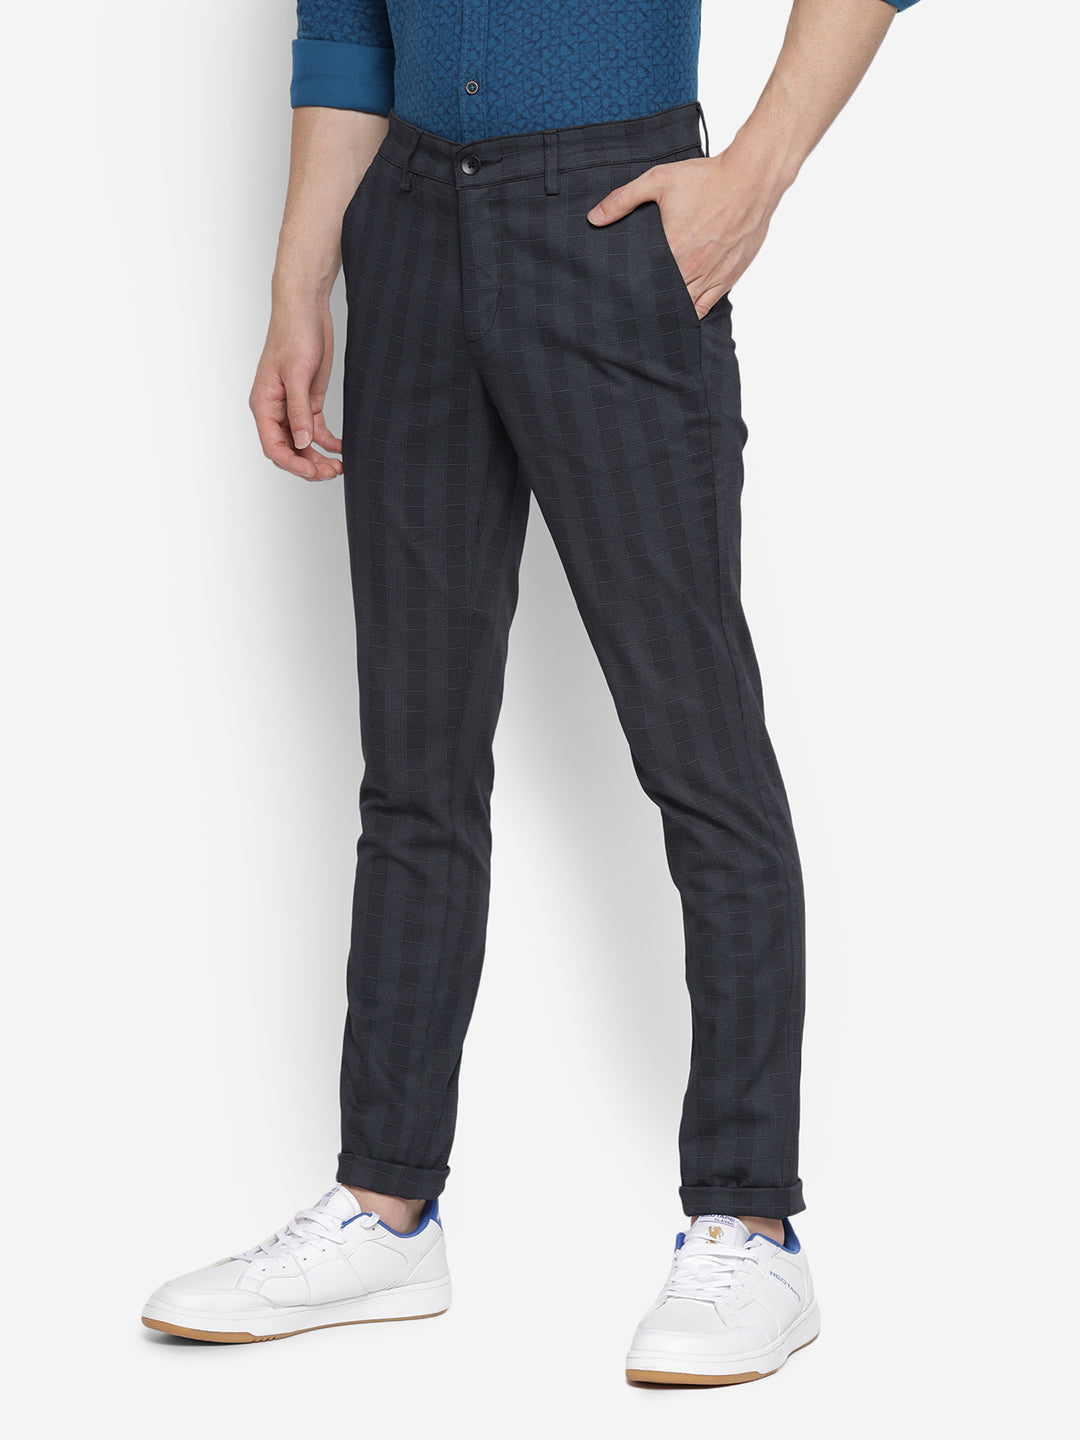 Checked Narrow Fit Causal Trouser